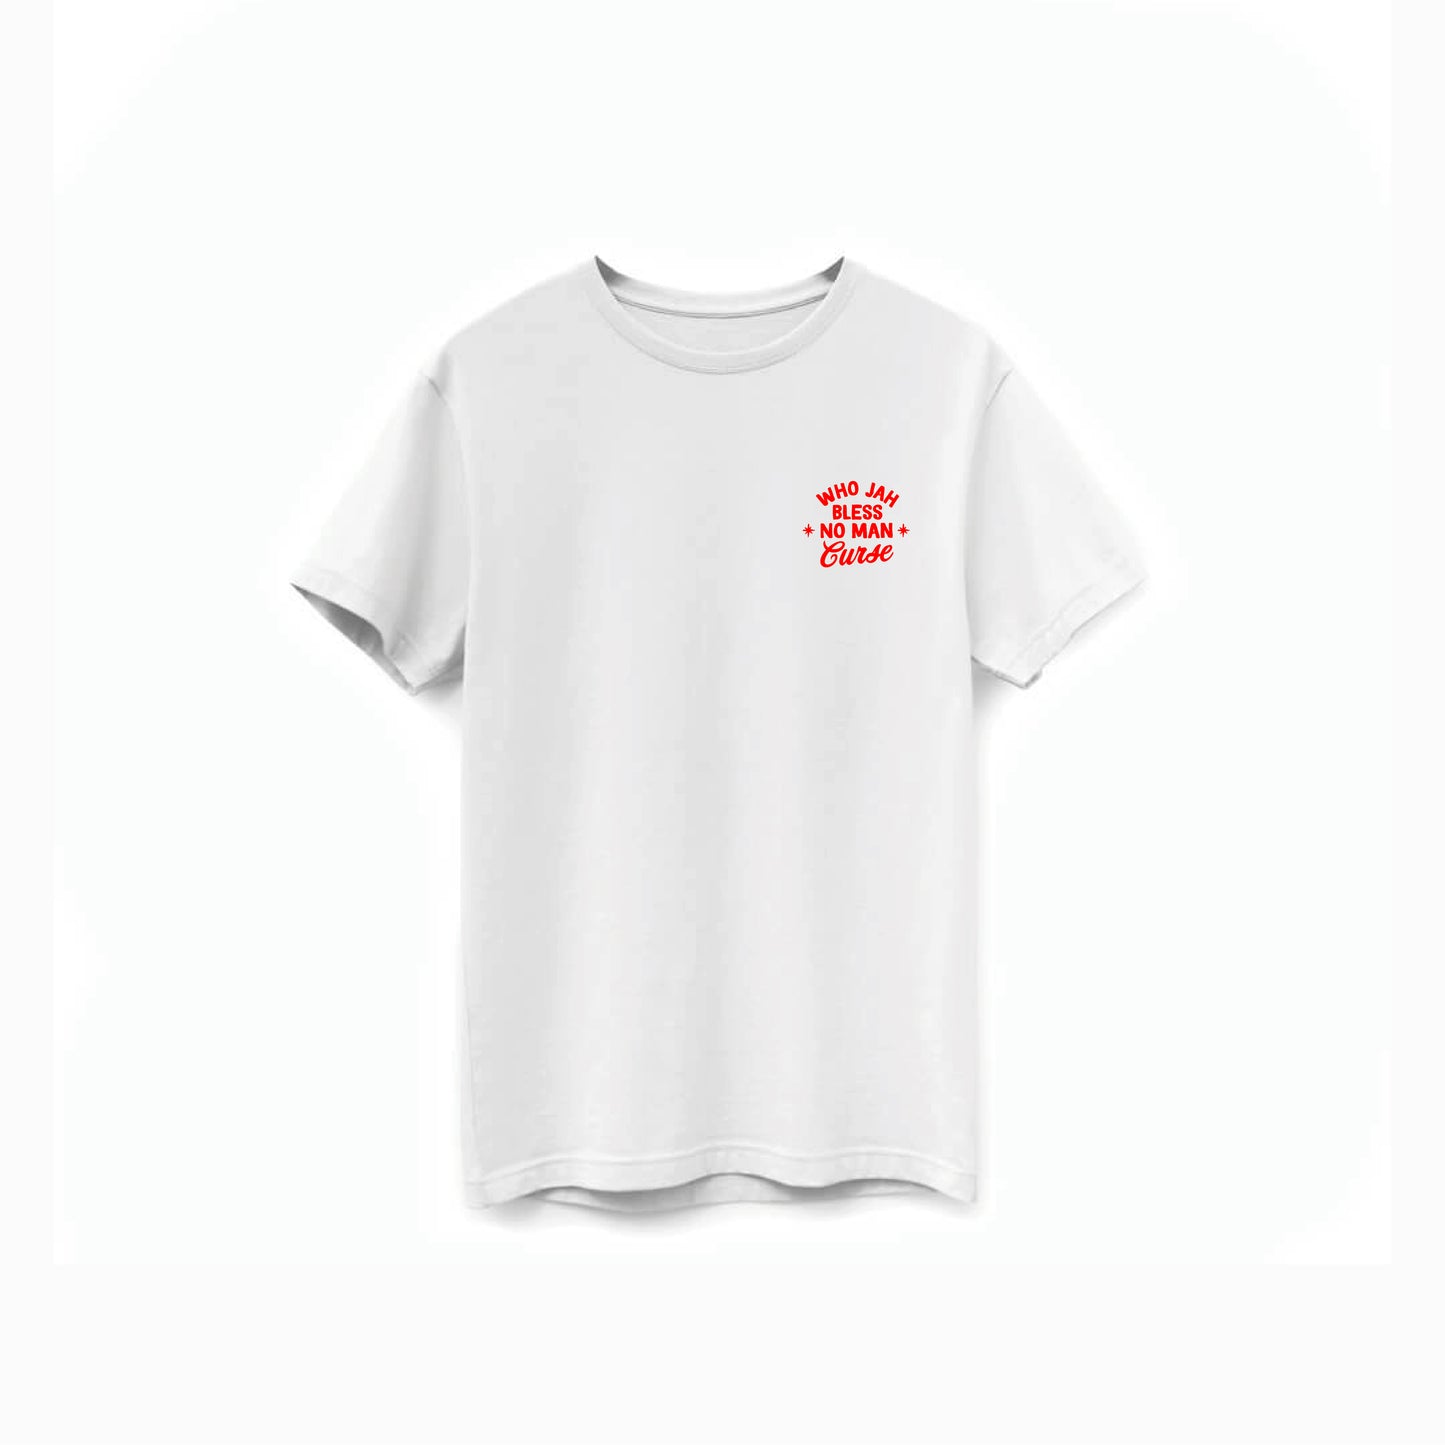 Mantra Tee - Red